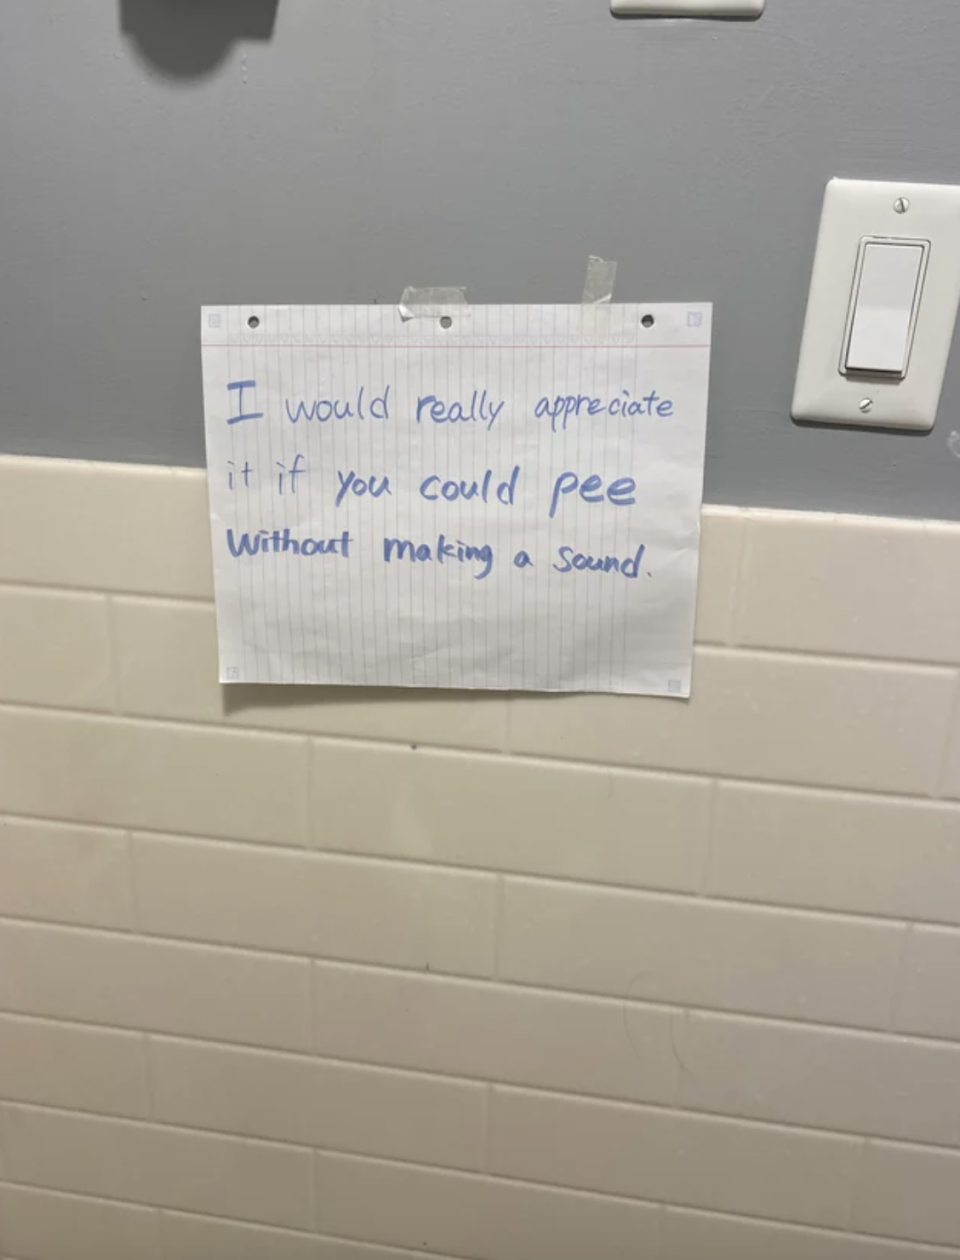 i would really appreciate it if you could pee without making a sound